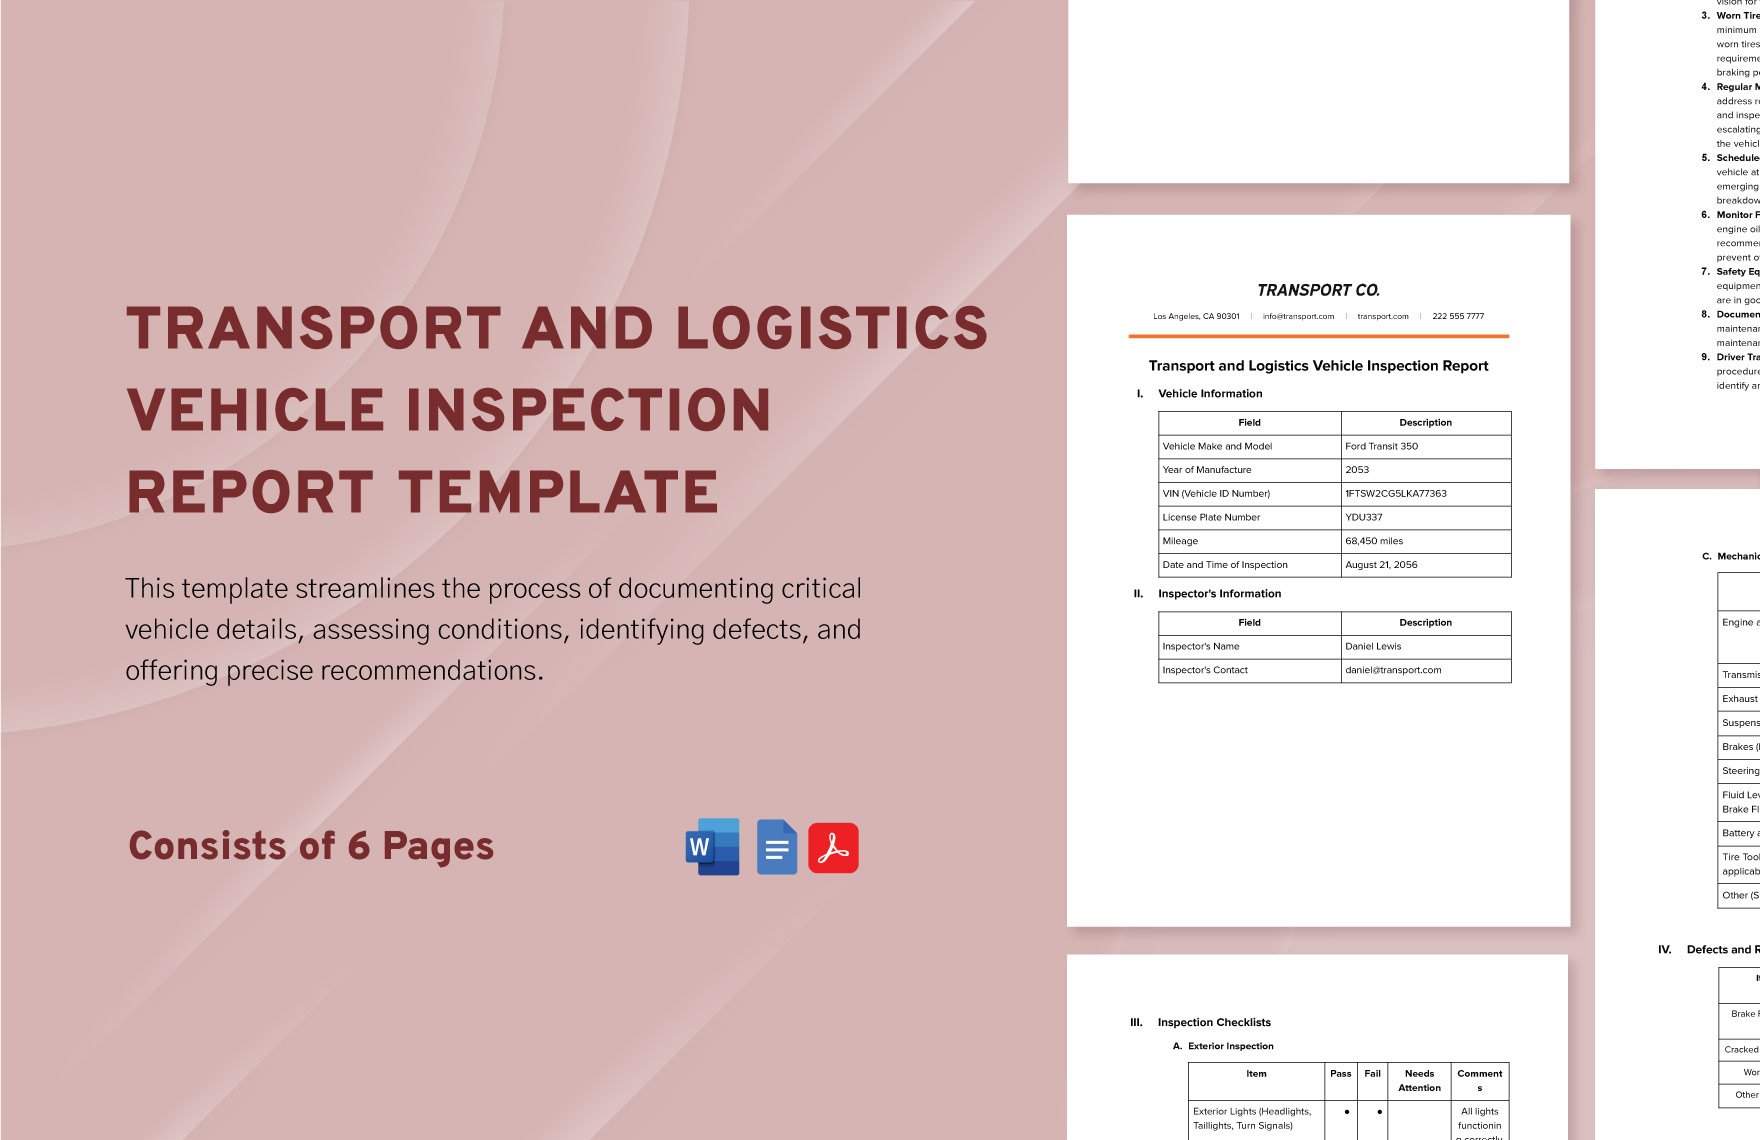 Transport and Logistics Vehicle Inspection Report Template